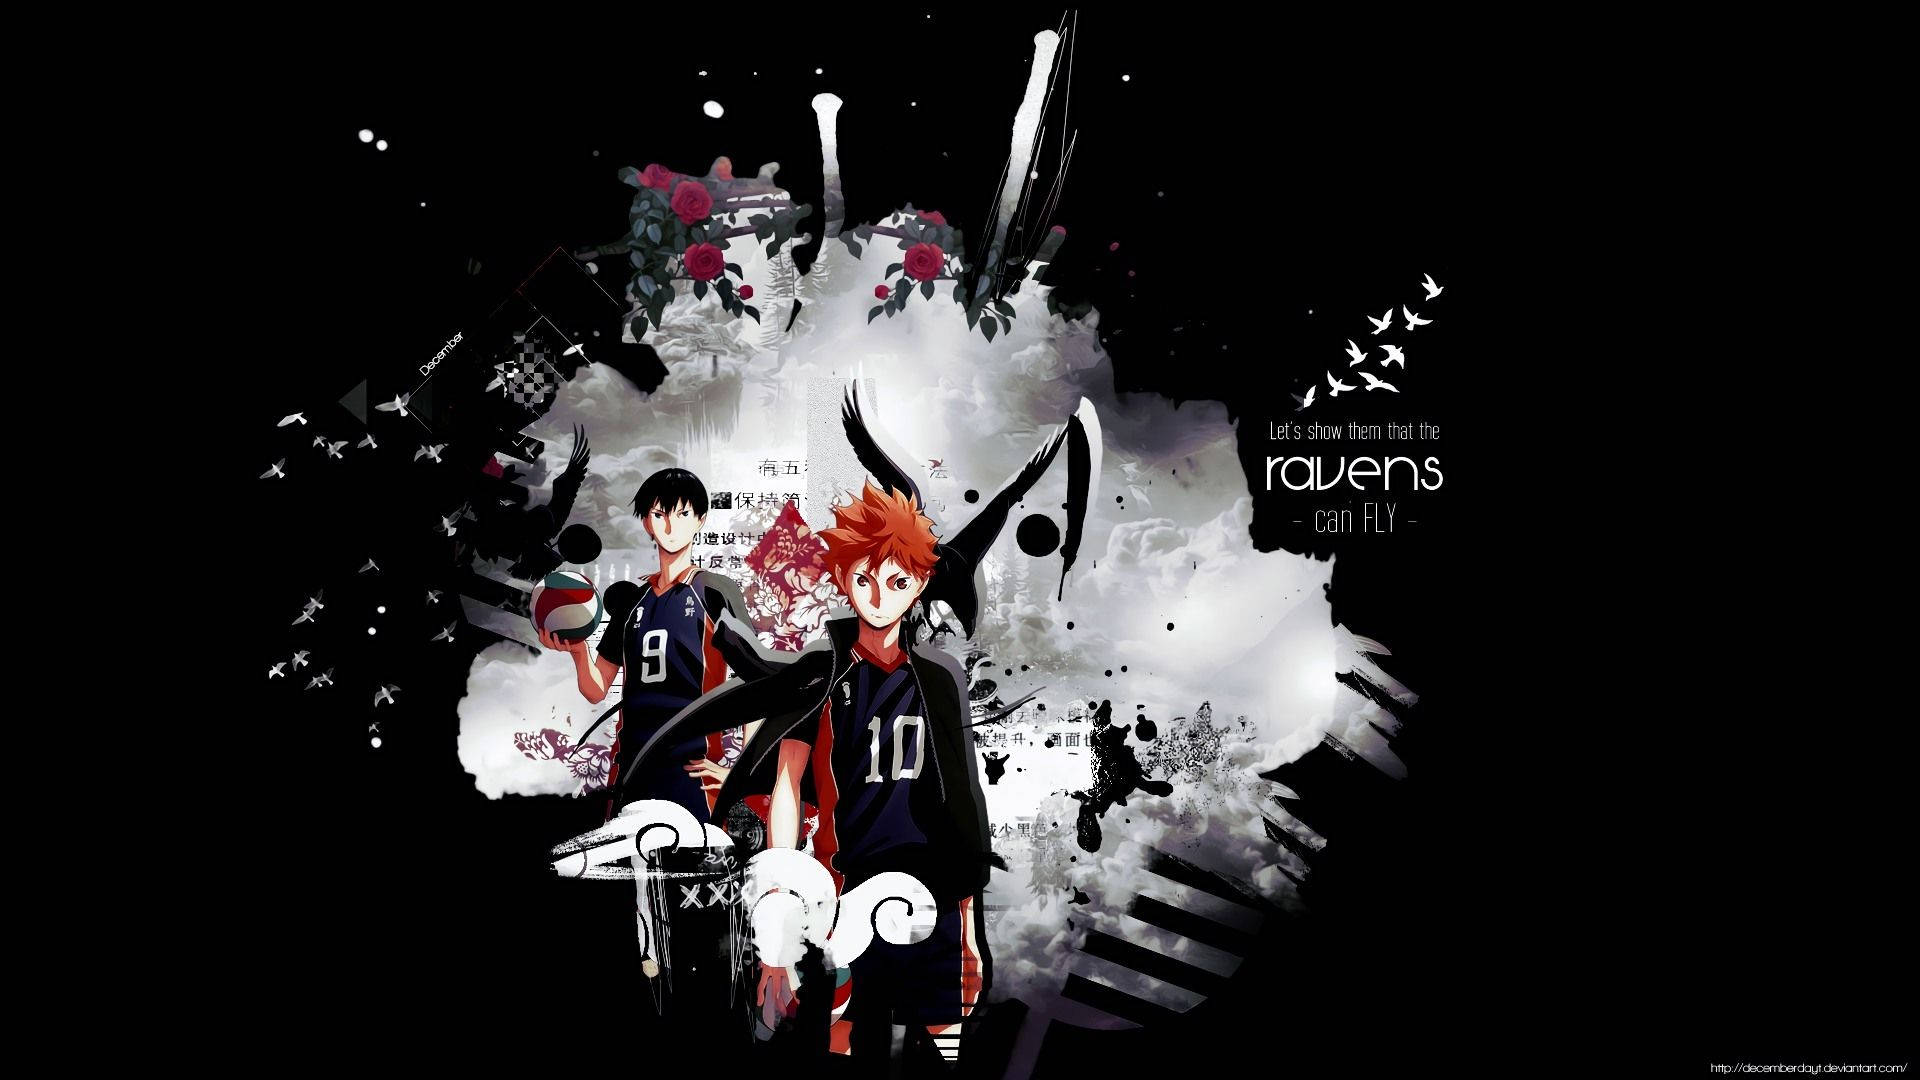 "The Haikyuu Dreams — we have the power to make them happen!" Wallpaper